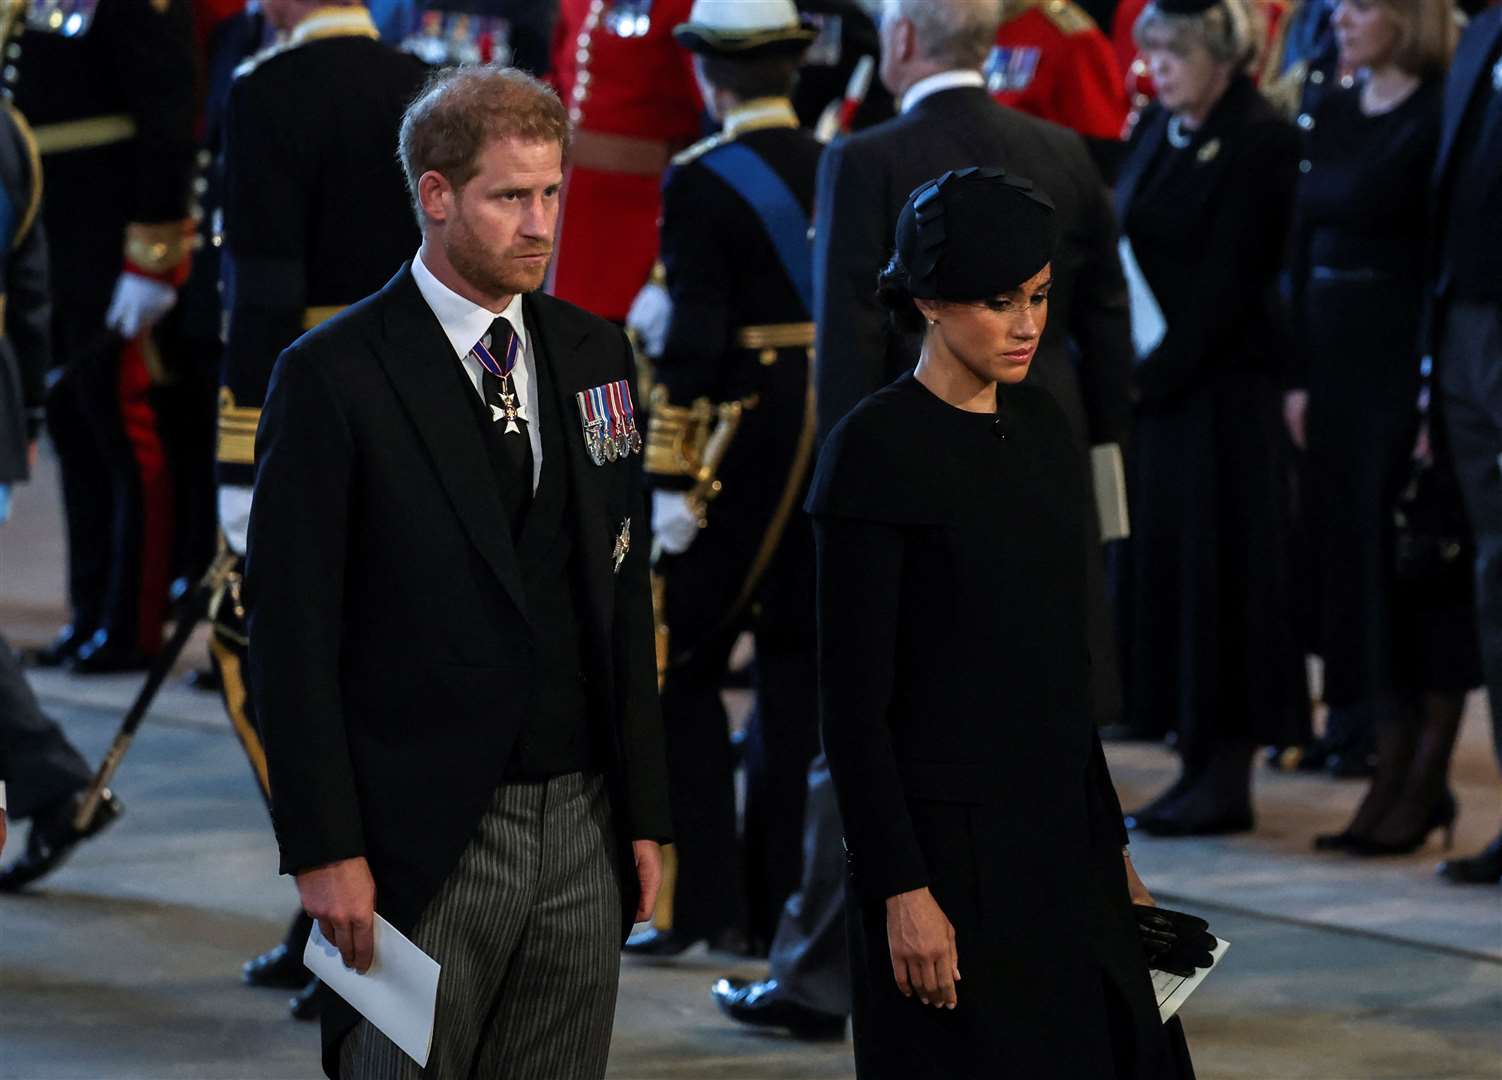 The Duke and Duchess of Sussex at the late Queen’s funeral (Alkis Konstantinidis/PA)